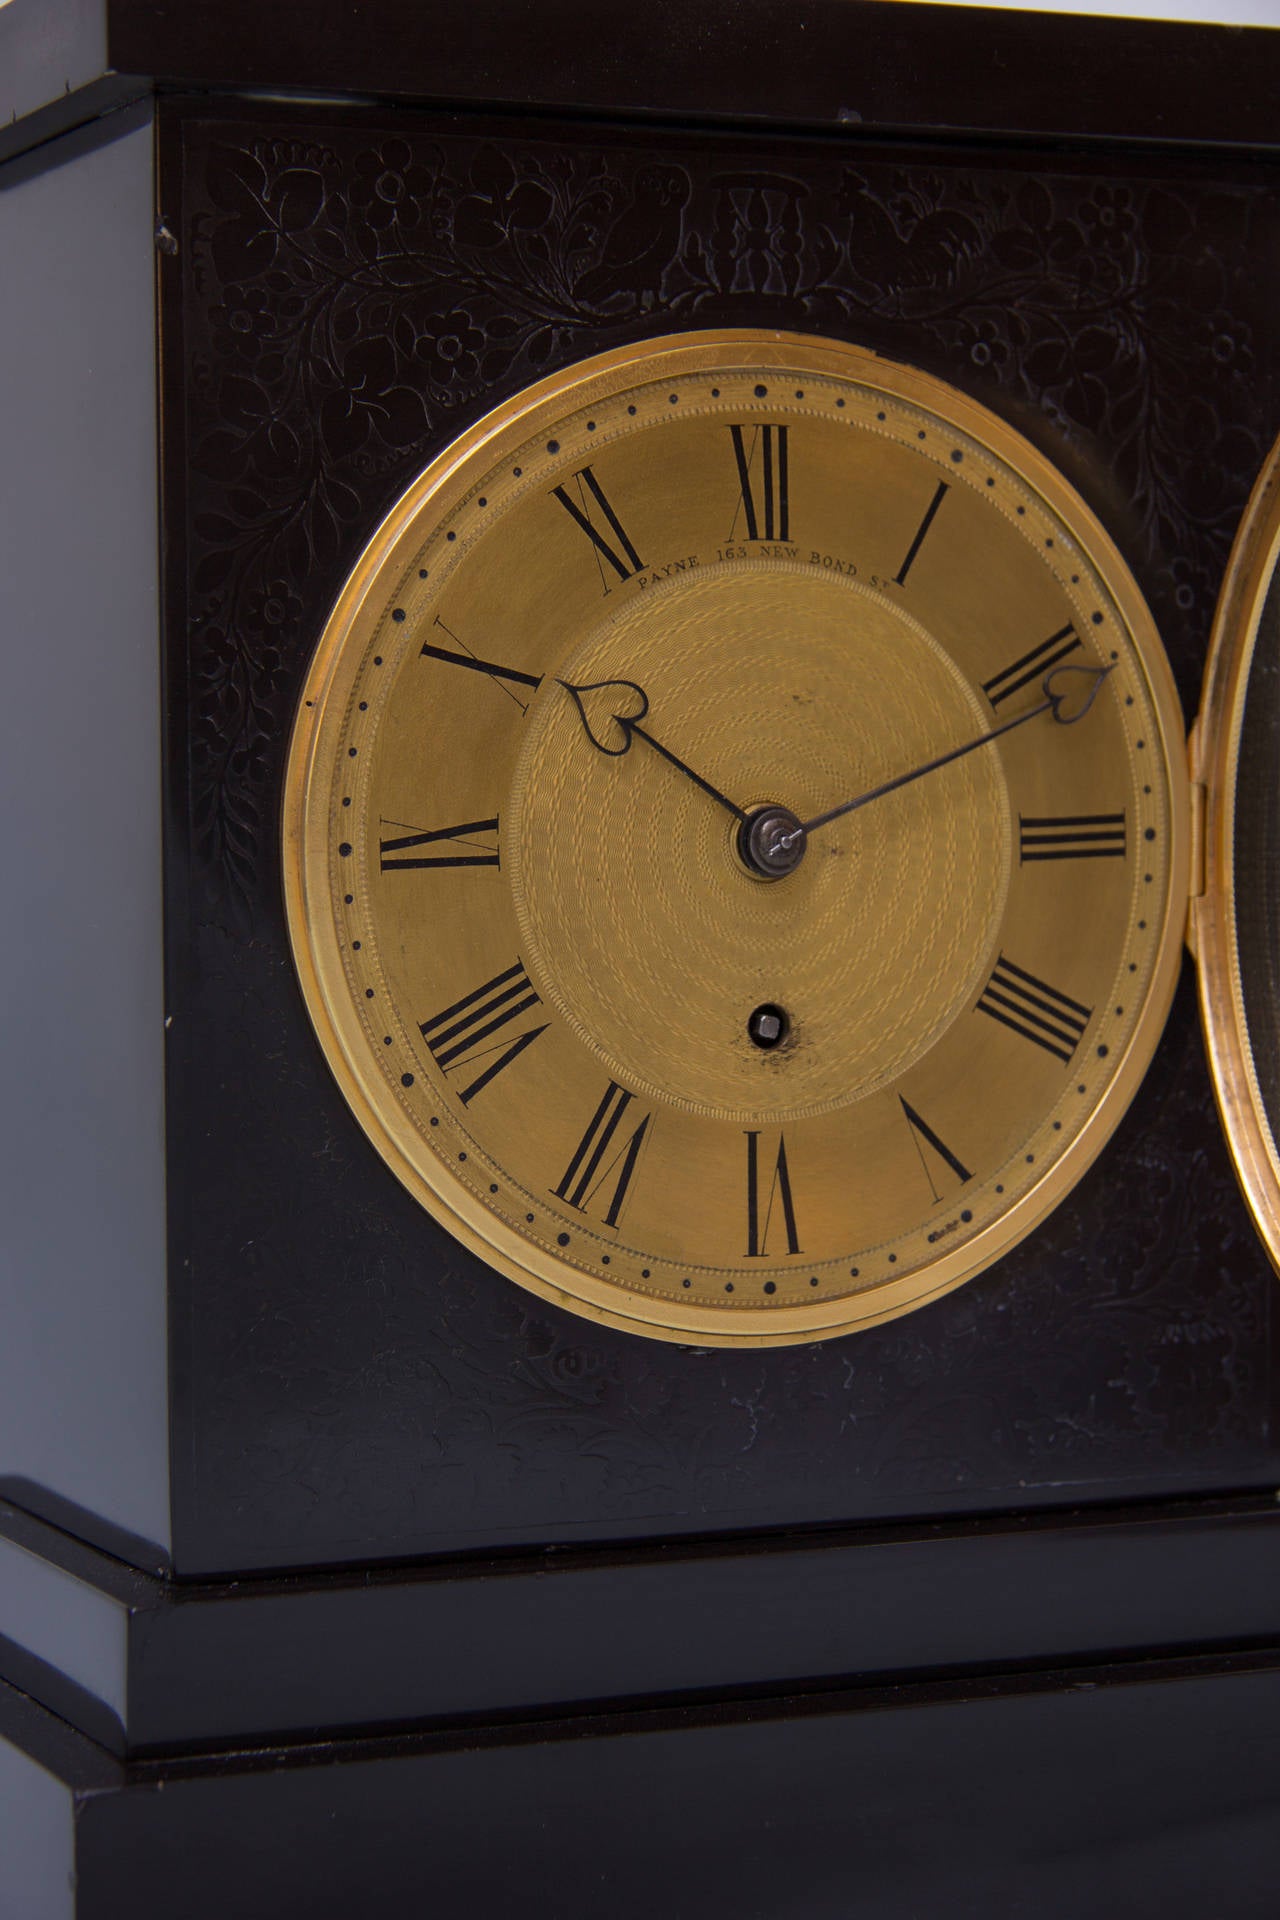 William Payne, a respected and recorded clock and watchmaker moved to 163 New Bond Street in 1825. Payne made some of the finest English carriage clocks of the period and this eight day, pendulum regulated timepiece displays some of the fine detail